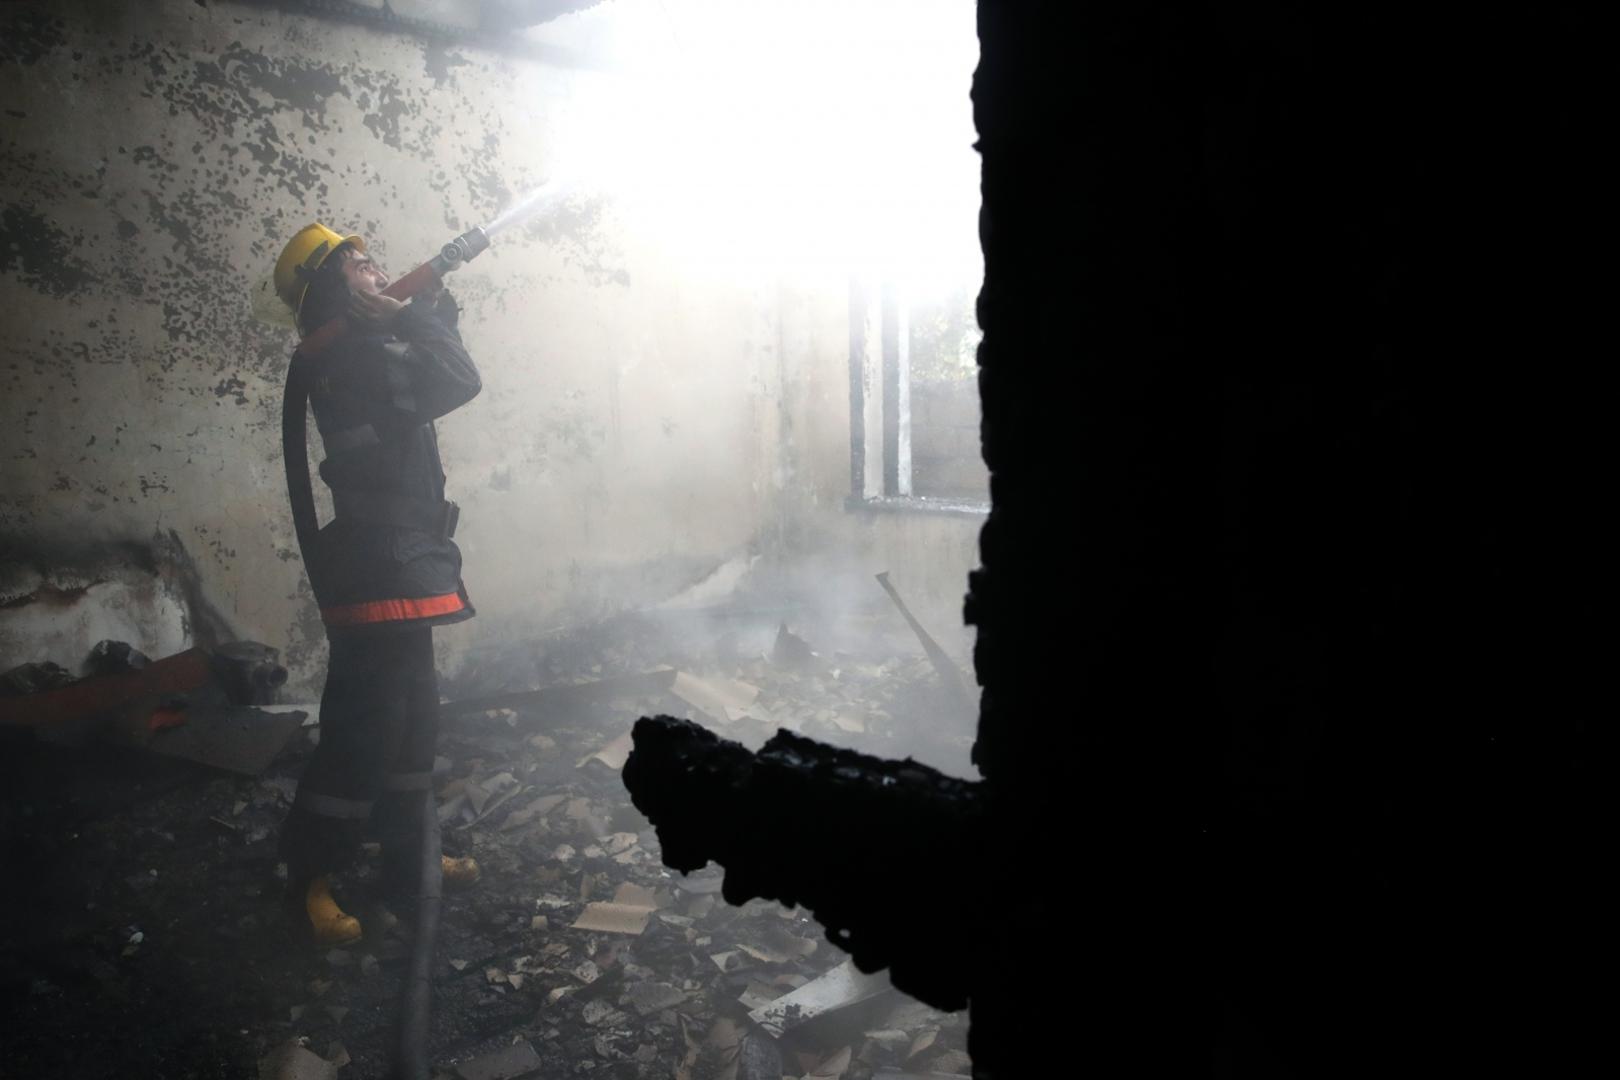 BARDA, AZERBAIJAN - OCTOBER 5, 2020: A firefighter battles a fire at a residential building damaged in a shelling attack. The situation in Nagorno-Karabakh escalated on September 27, 2020, with reports from Yerevan on the Azerbaijani troops advancing in the direction of Nagorno-Karabakh and shelling its settlements, including the capital city of Stepanakert. Both Azerbaijan and Armenia have declared martial law and military mobilization, reporting on casualties and injuries among civilians as well. Valery Sharifulin/TASS Photo via Newscom Newscom/PIXSELL